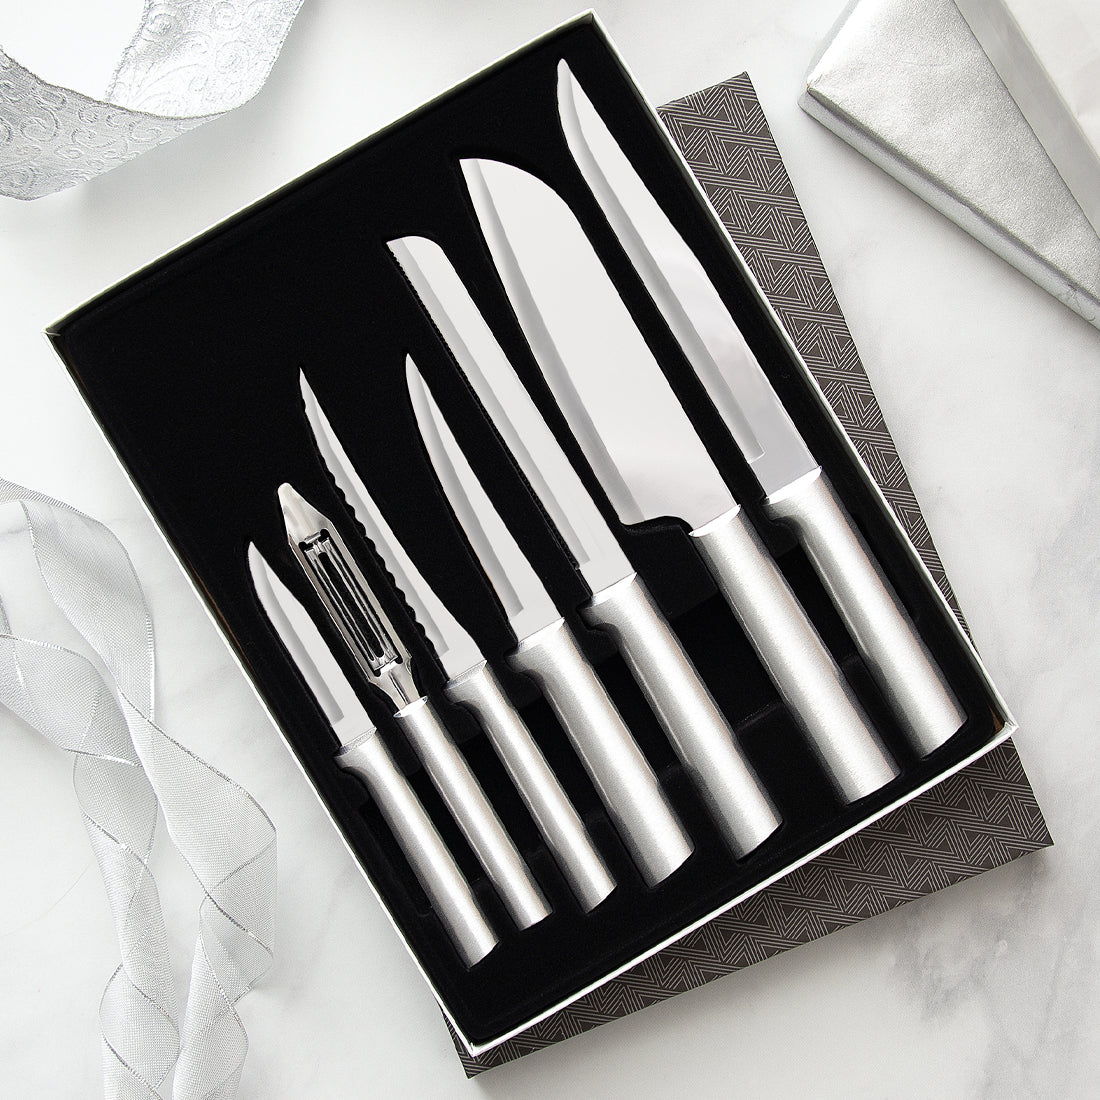 Rada Cutlery The Starter Gift Set with silver handles in a black-lined gift box.